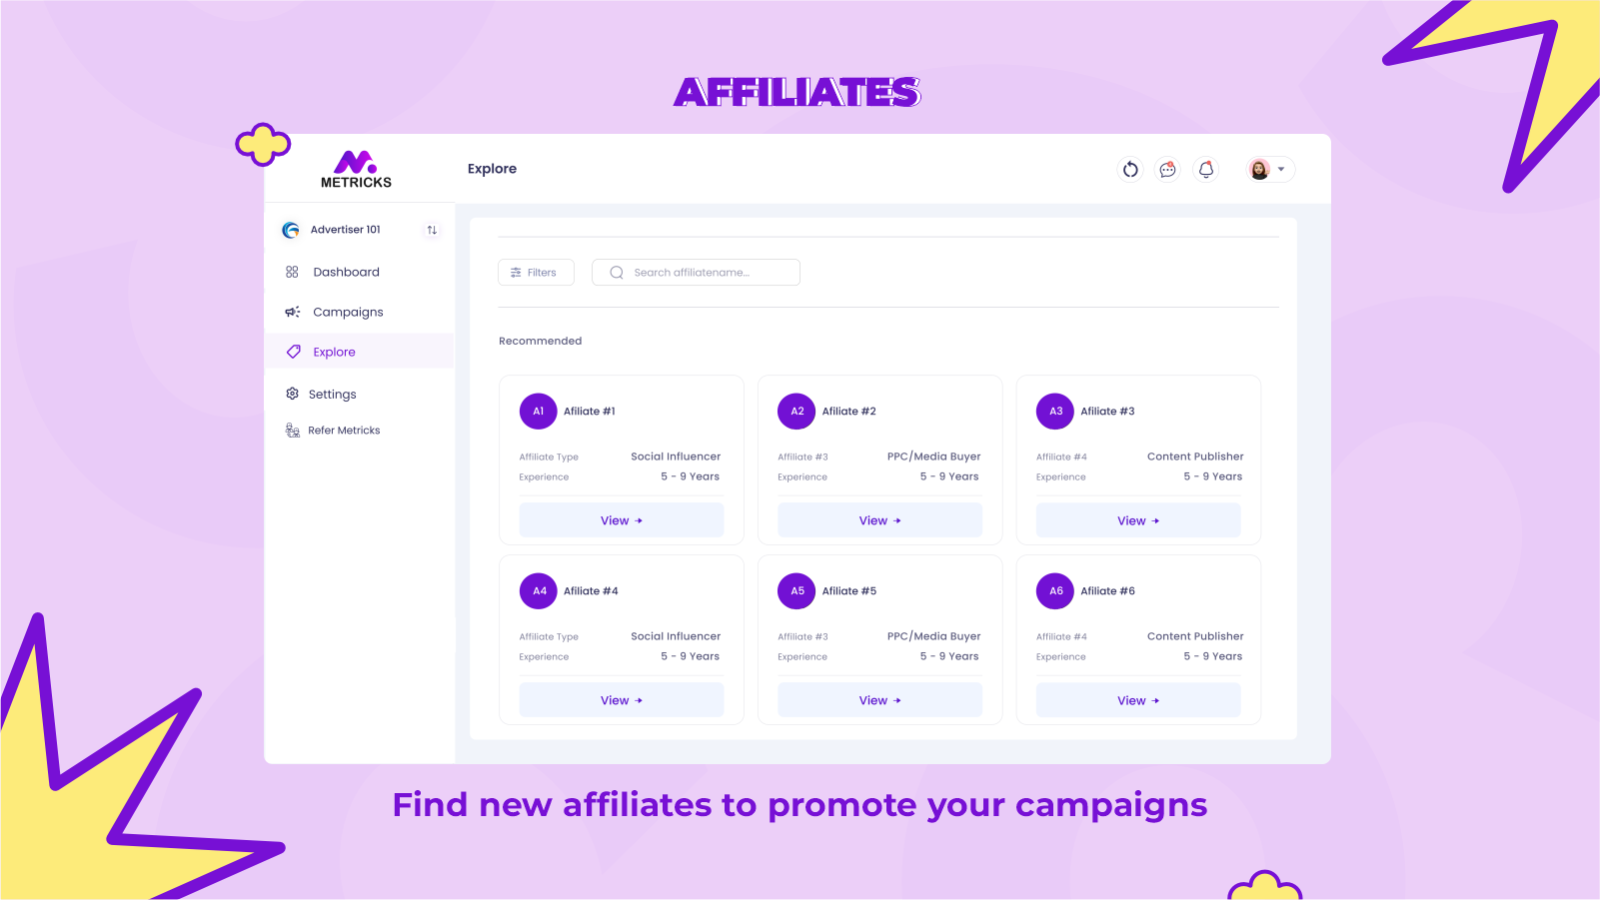 Fnd new affiliates to promote your campaigns 